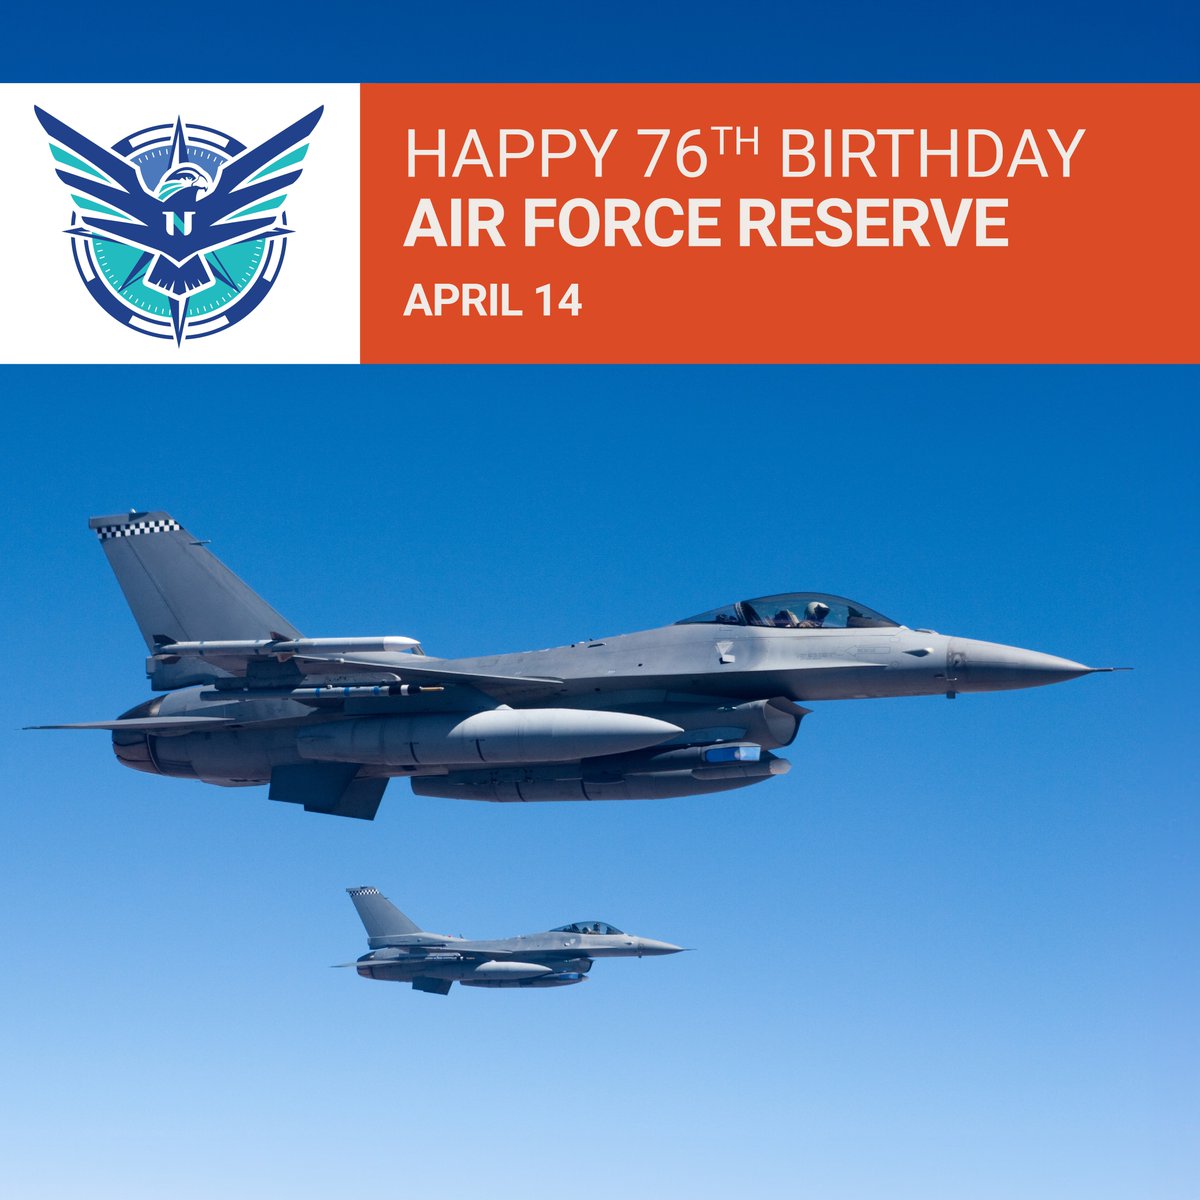 Happy birthday, @USAFReserve! Your dedication to flying high and saving lives from the skies inspires us. Keep rising above! ✈️ 🇺🇸